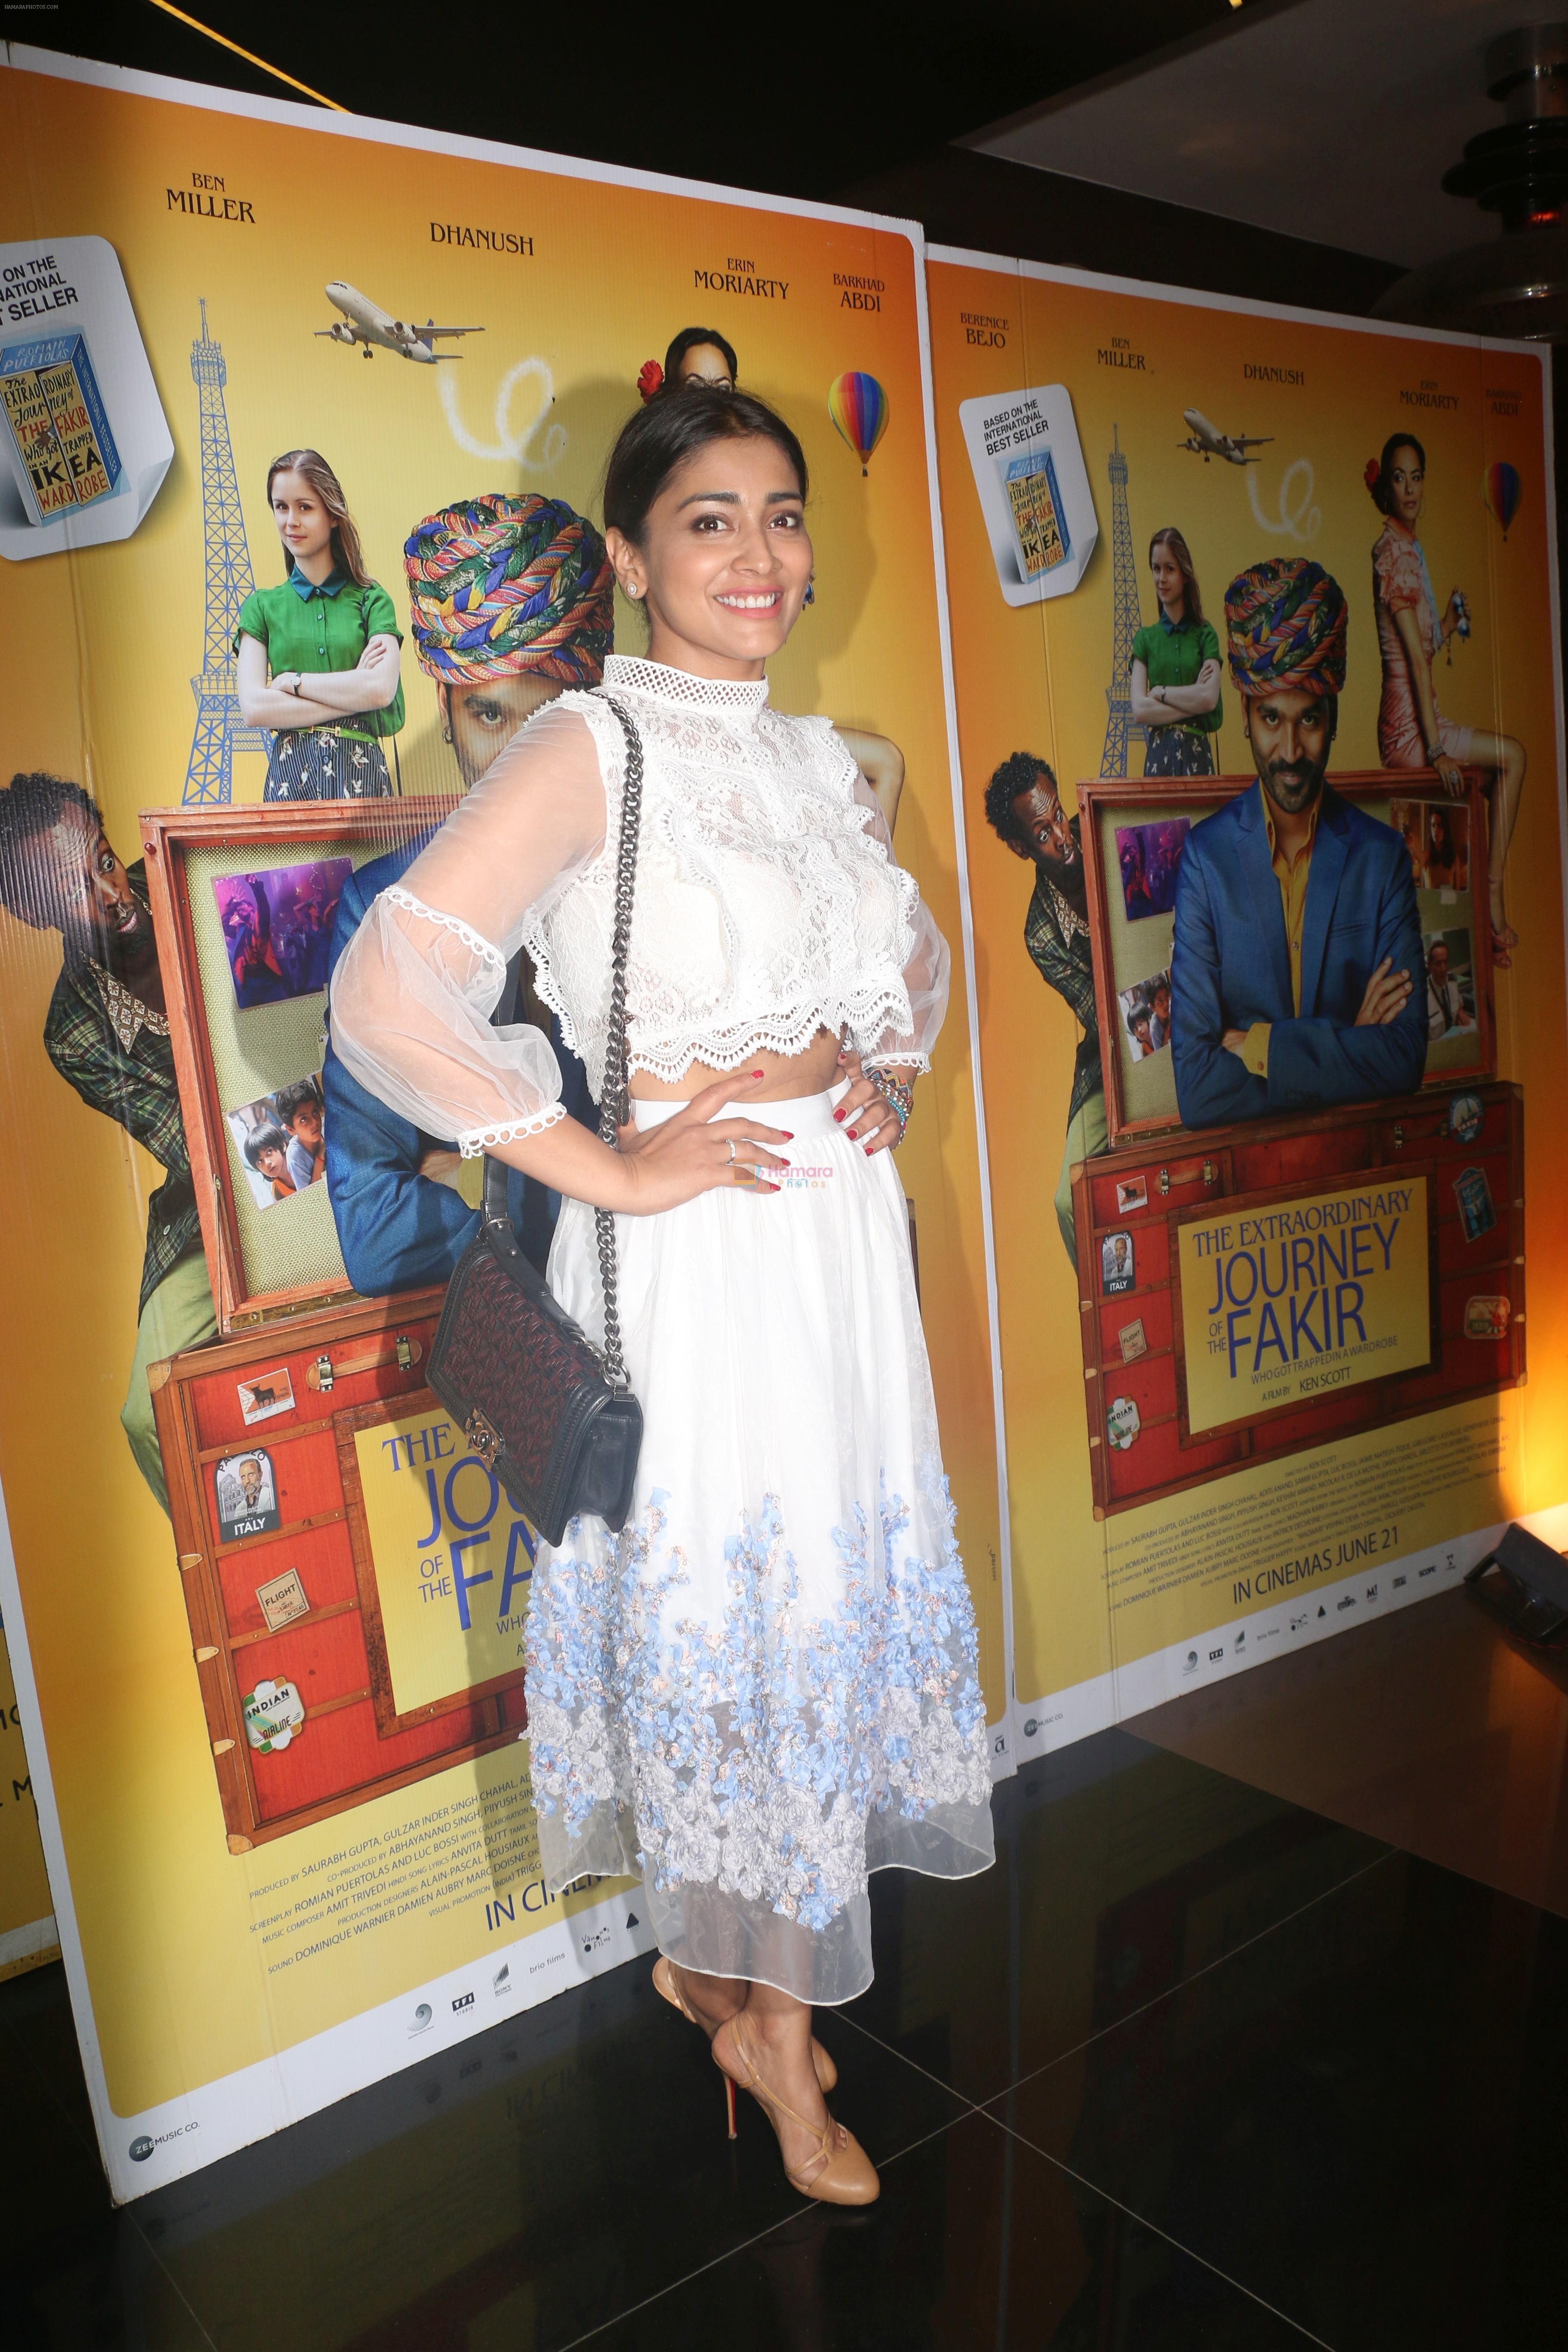 at the  Screening of the film The Extraordinary Journey of the fakir on 21st June 2019